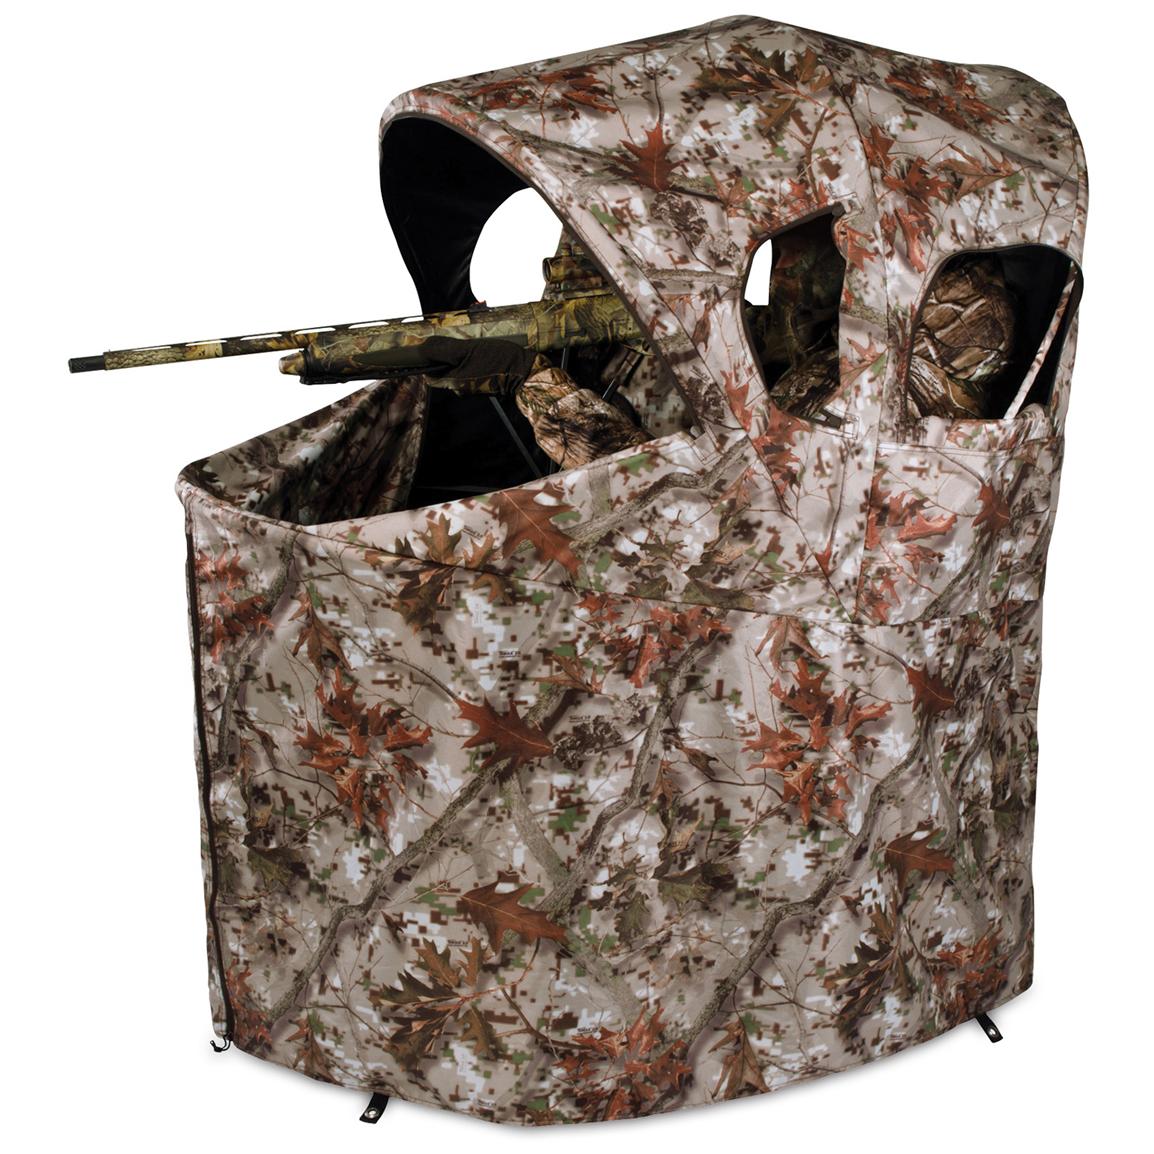 Ameristep Chair Blind Tangle 2 0 Camo 213447 Ground Blinds At Sportsman S Guide